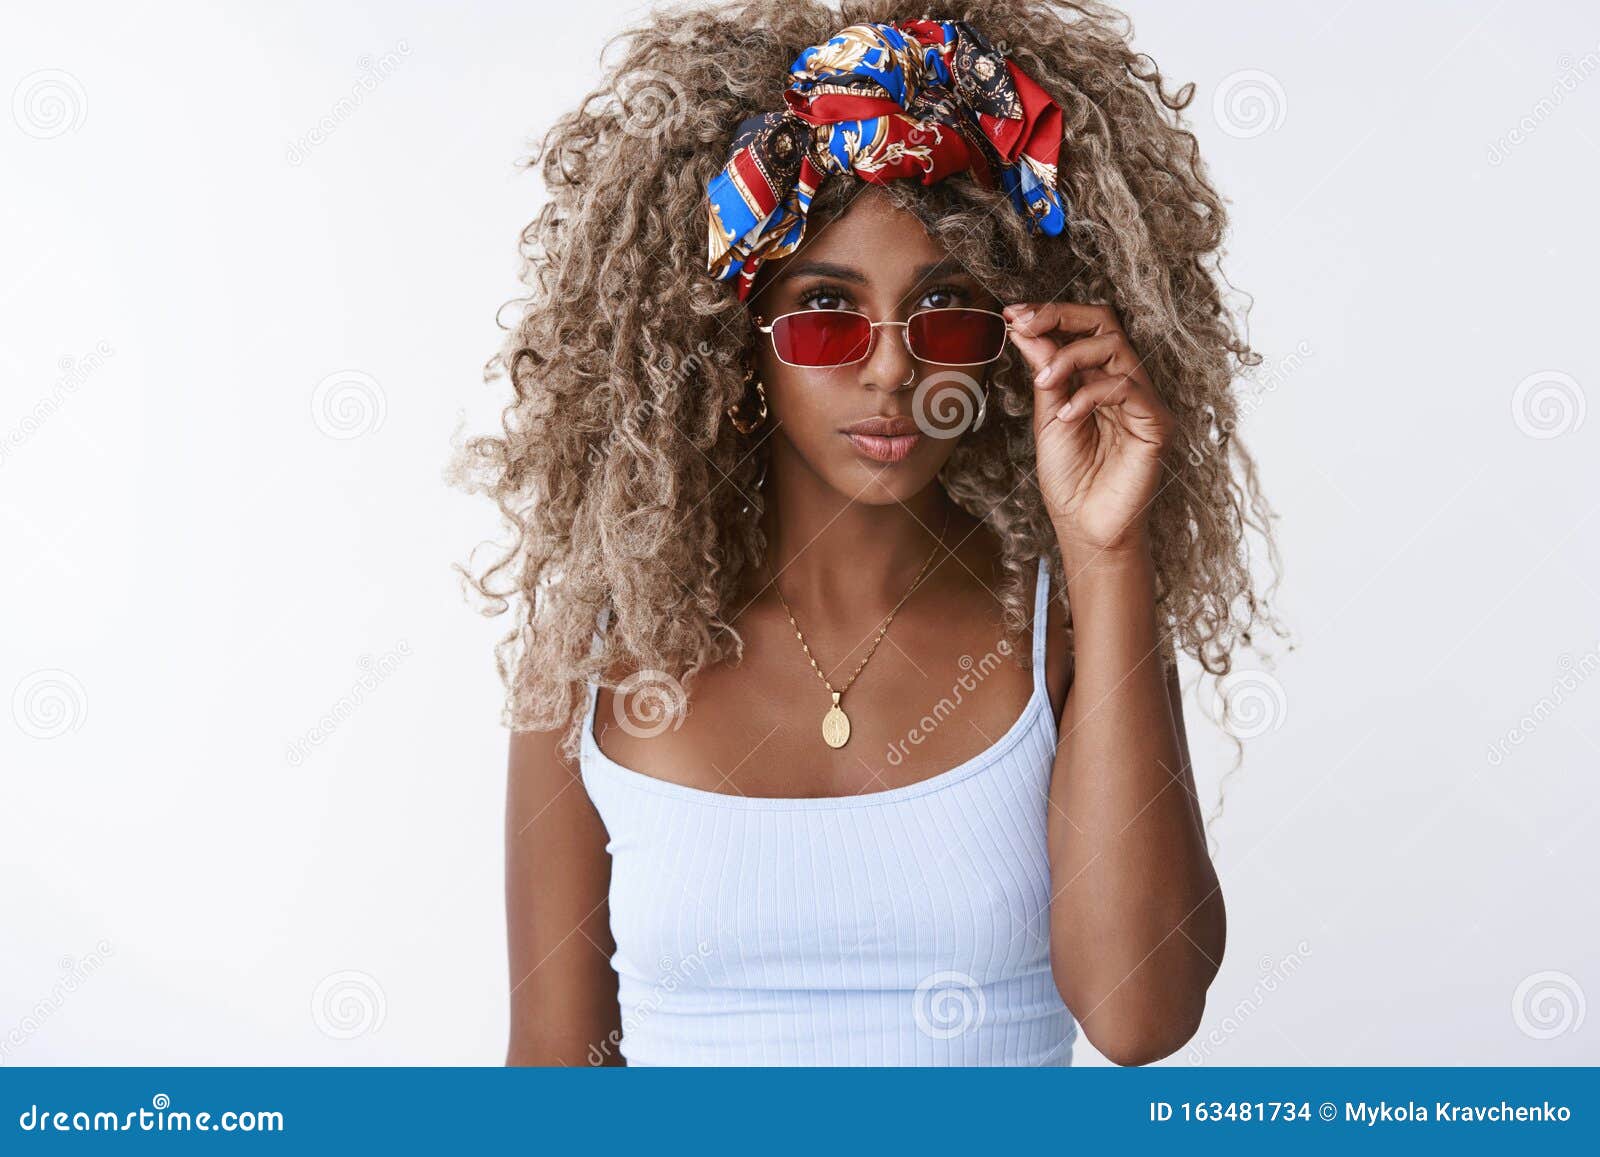 https://thumbs.dreamstime.com/z/style-fashion-women-concept-attractive-sassy-cool-blond-hipster-african-american-female-afro-hairstyle-woman-wear-red-163481734.jpg